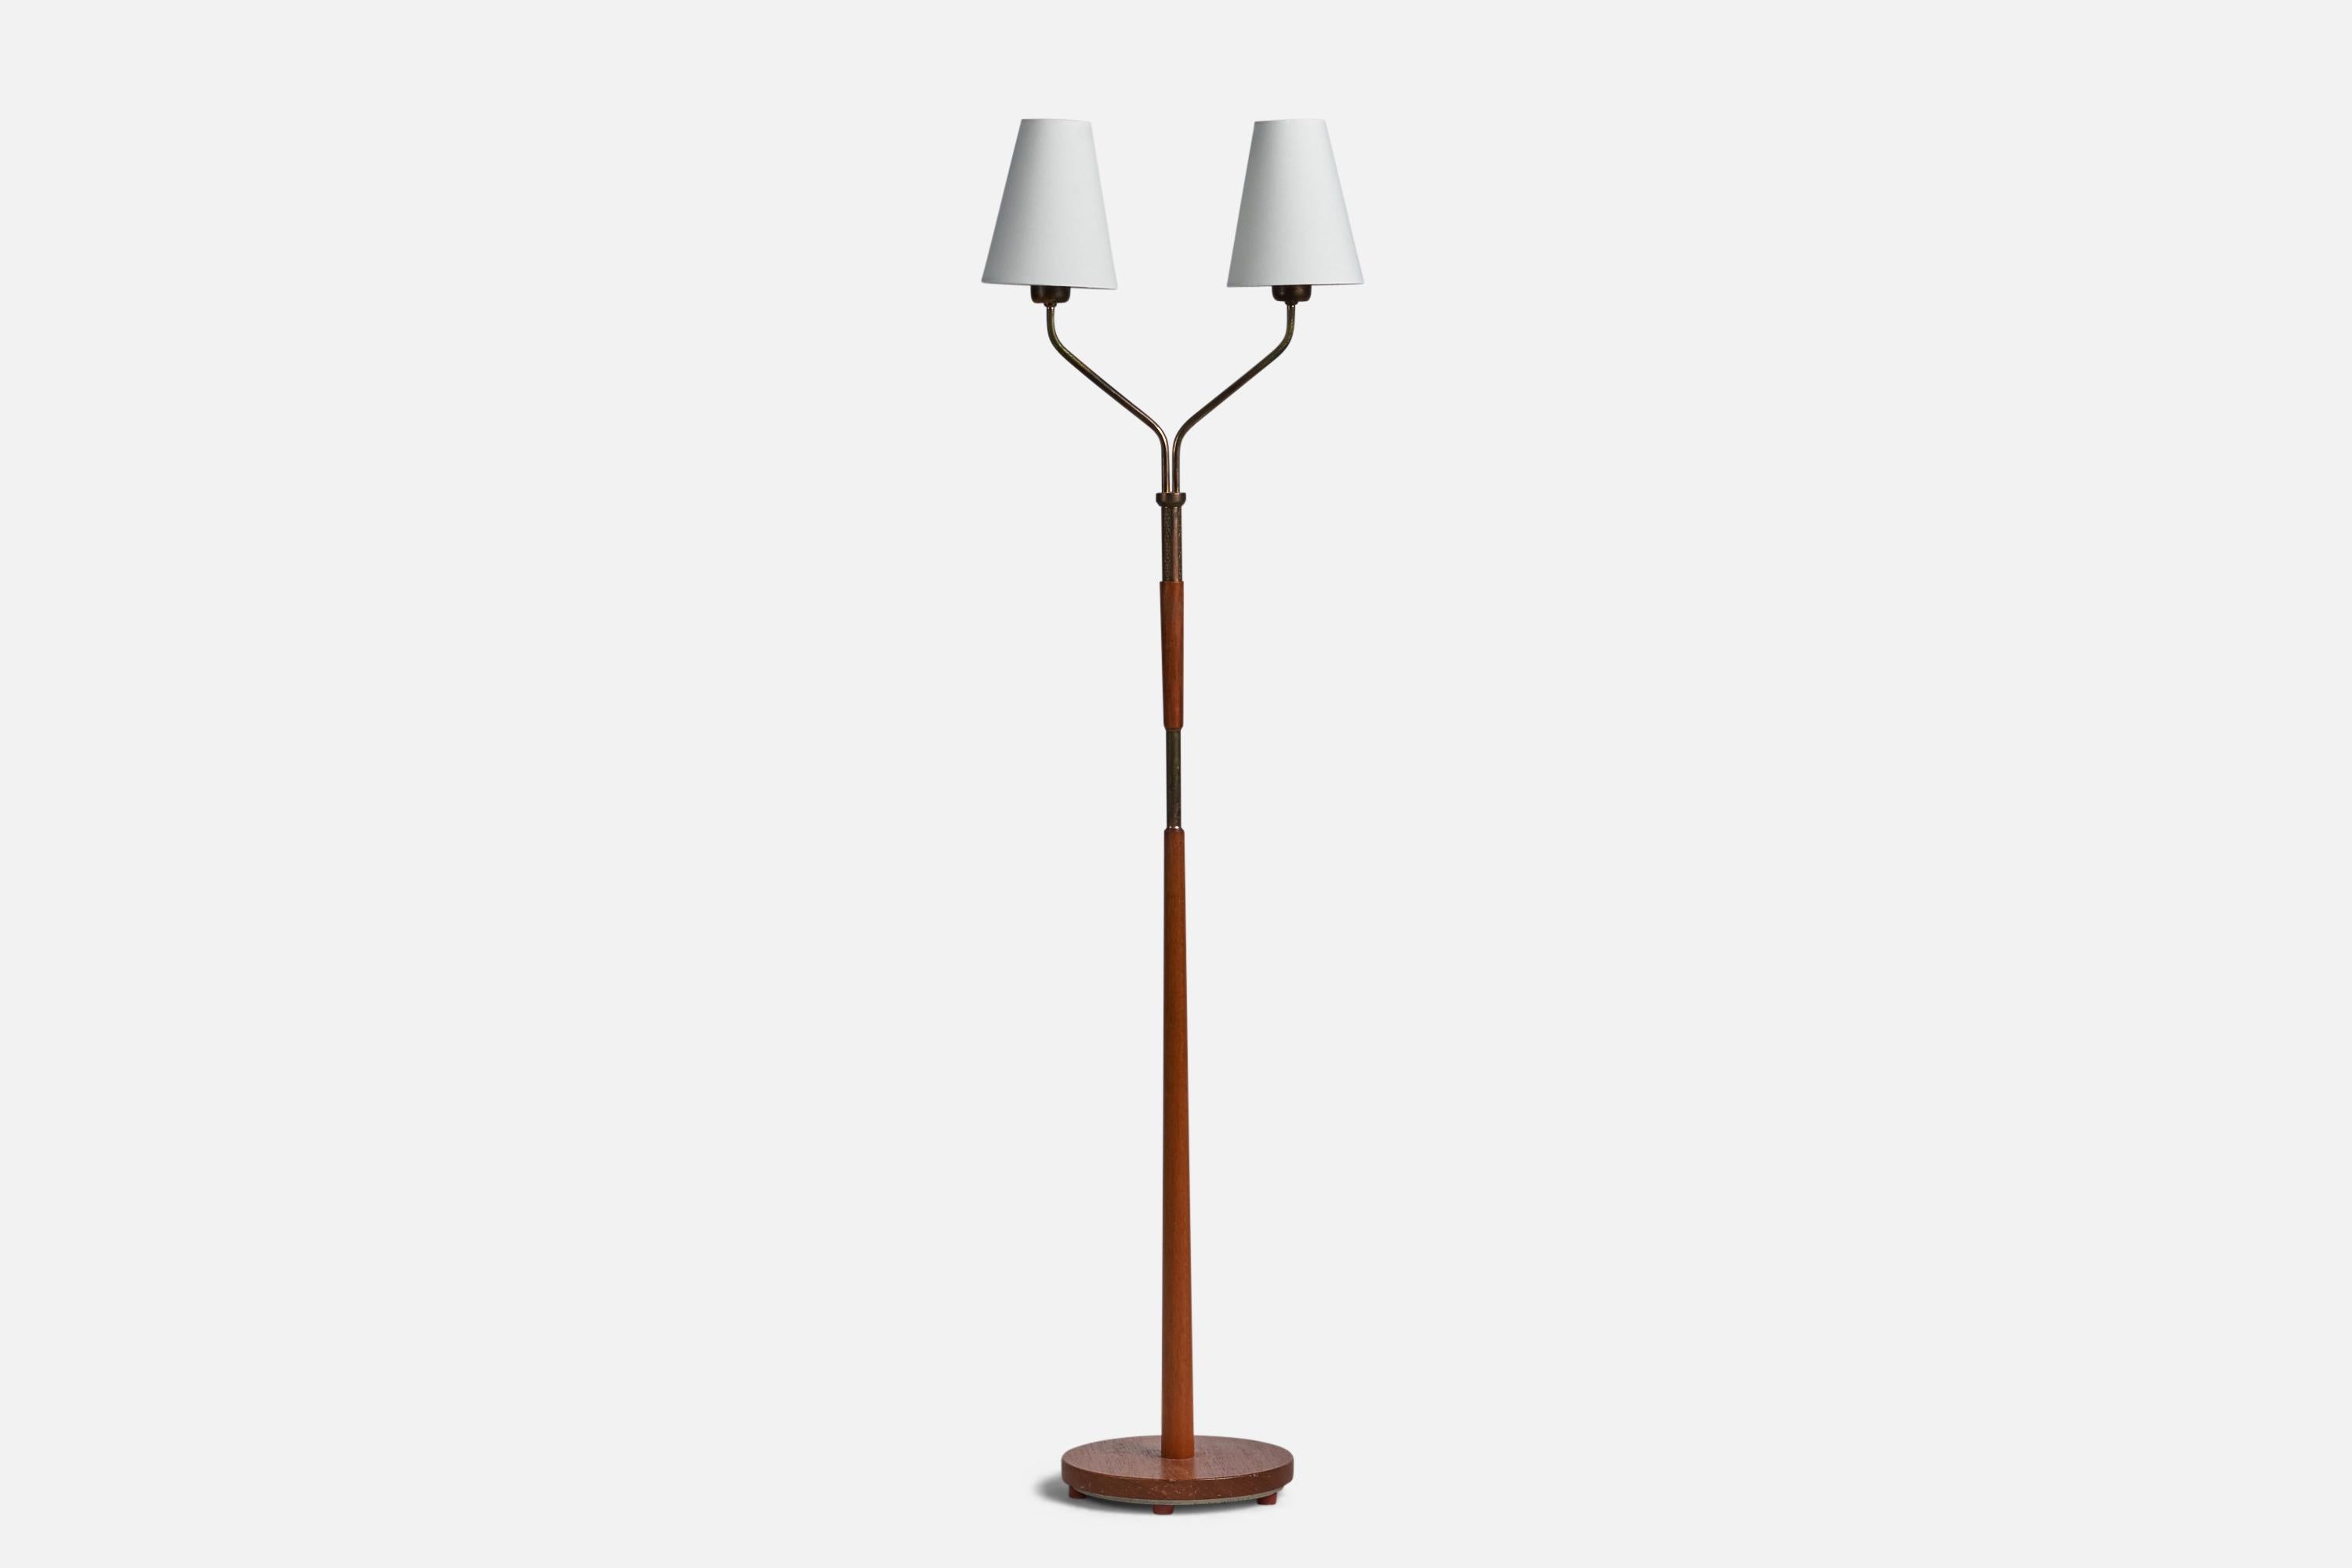 A brass, white fabric and teak floor lamp designed and produced in Sweden, 1950s.

Overall Dimensions (inches): 56” H x 15.25” W x 9.5” D
Bulb Specifications: E-26 Bulb
Number of Sockets: 2
All lighting will be converted for US usage. We are unable